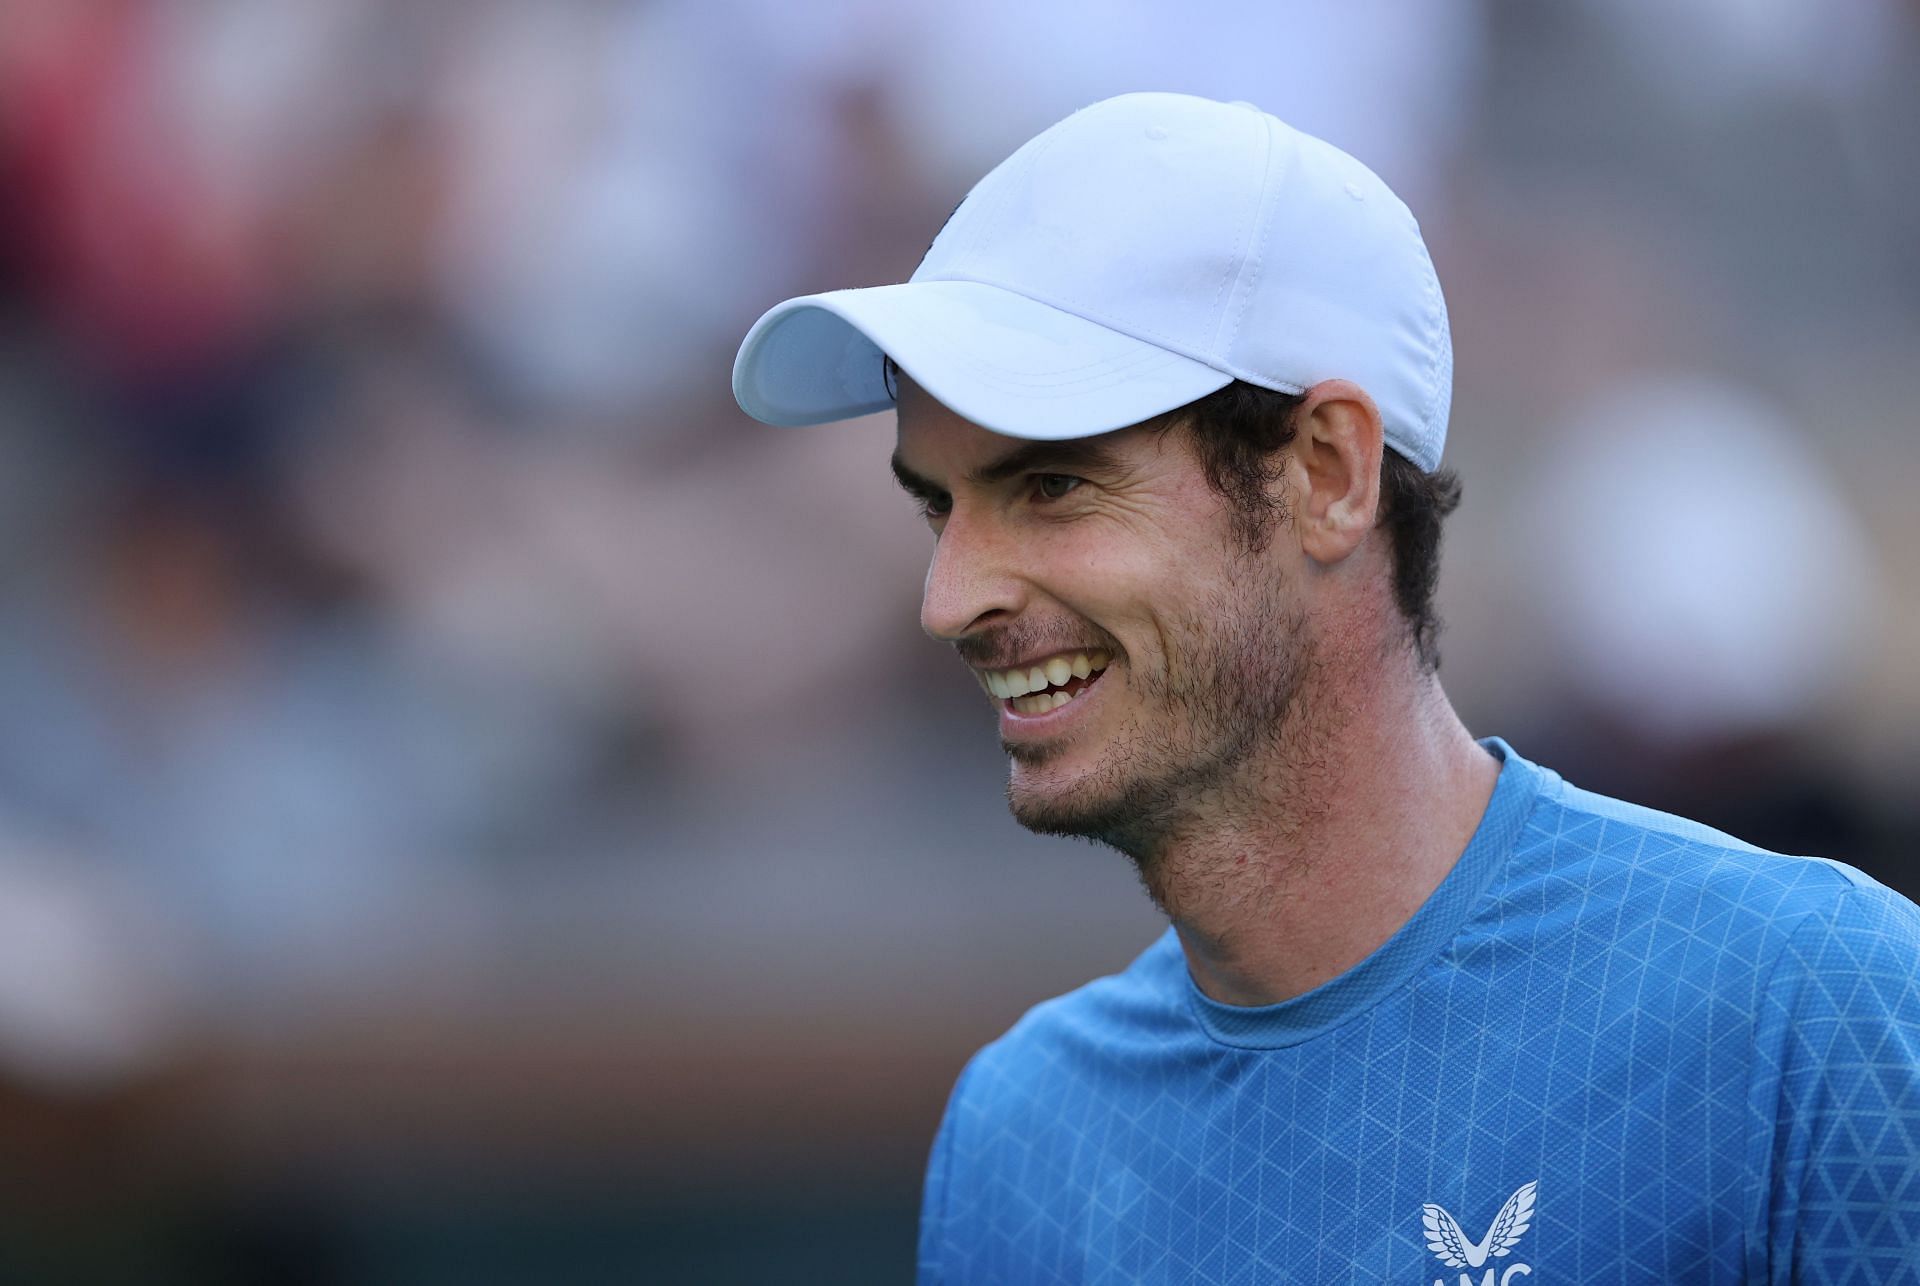 Murray will be looking to make his first semifinal of 2021.